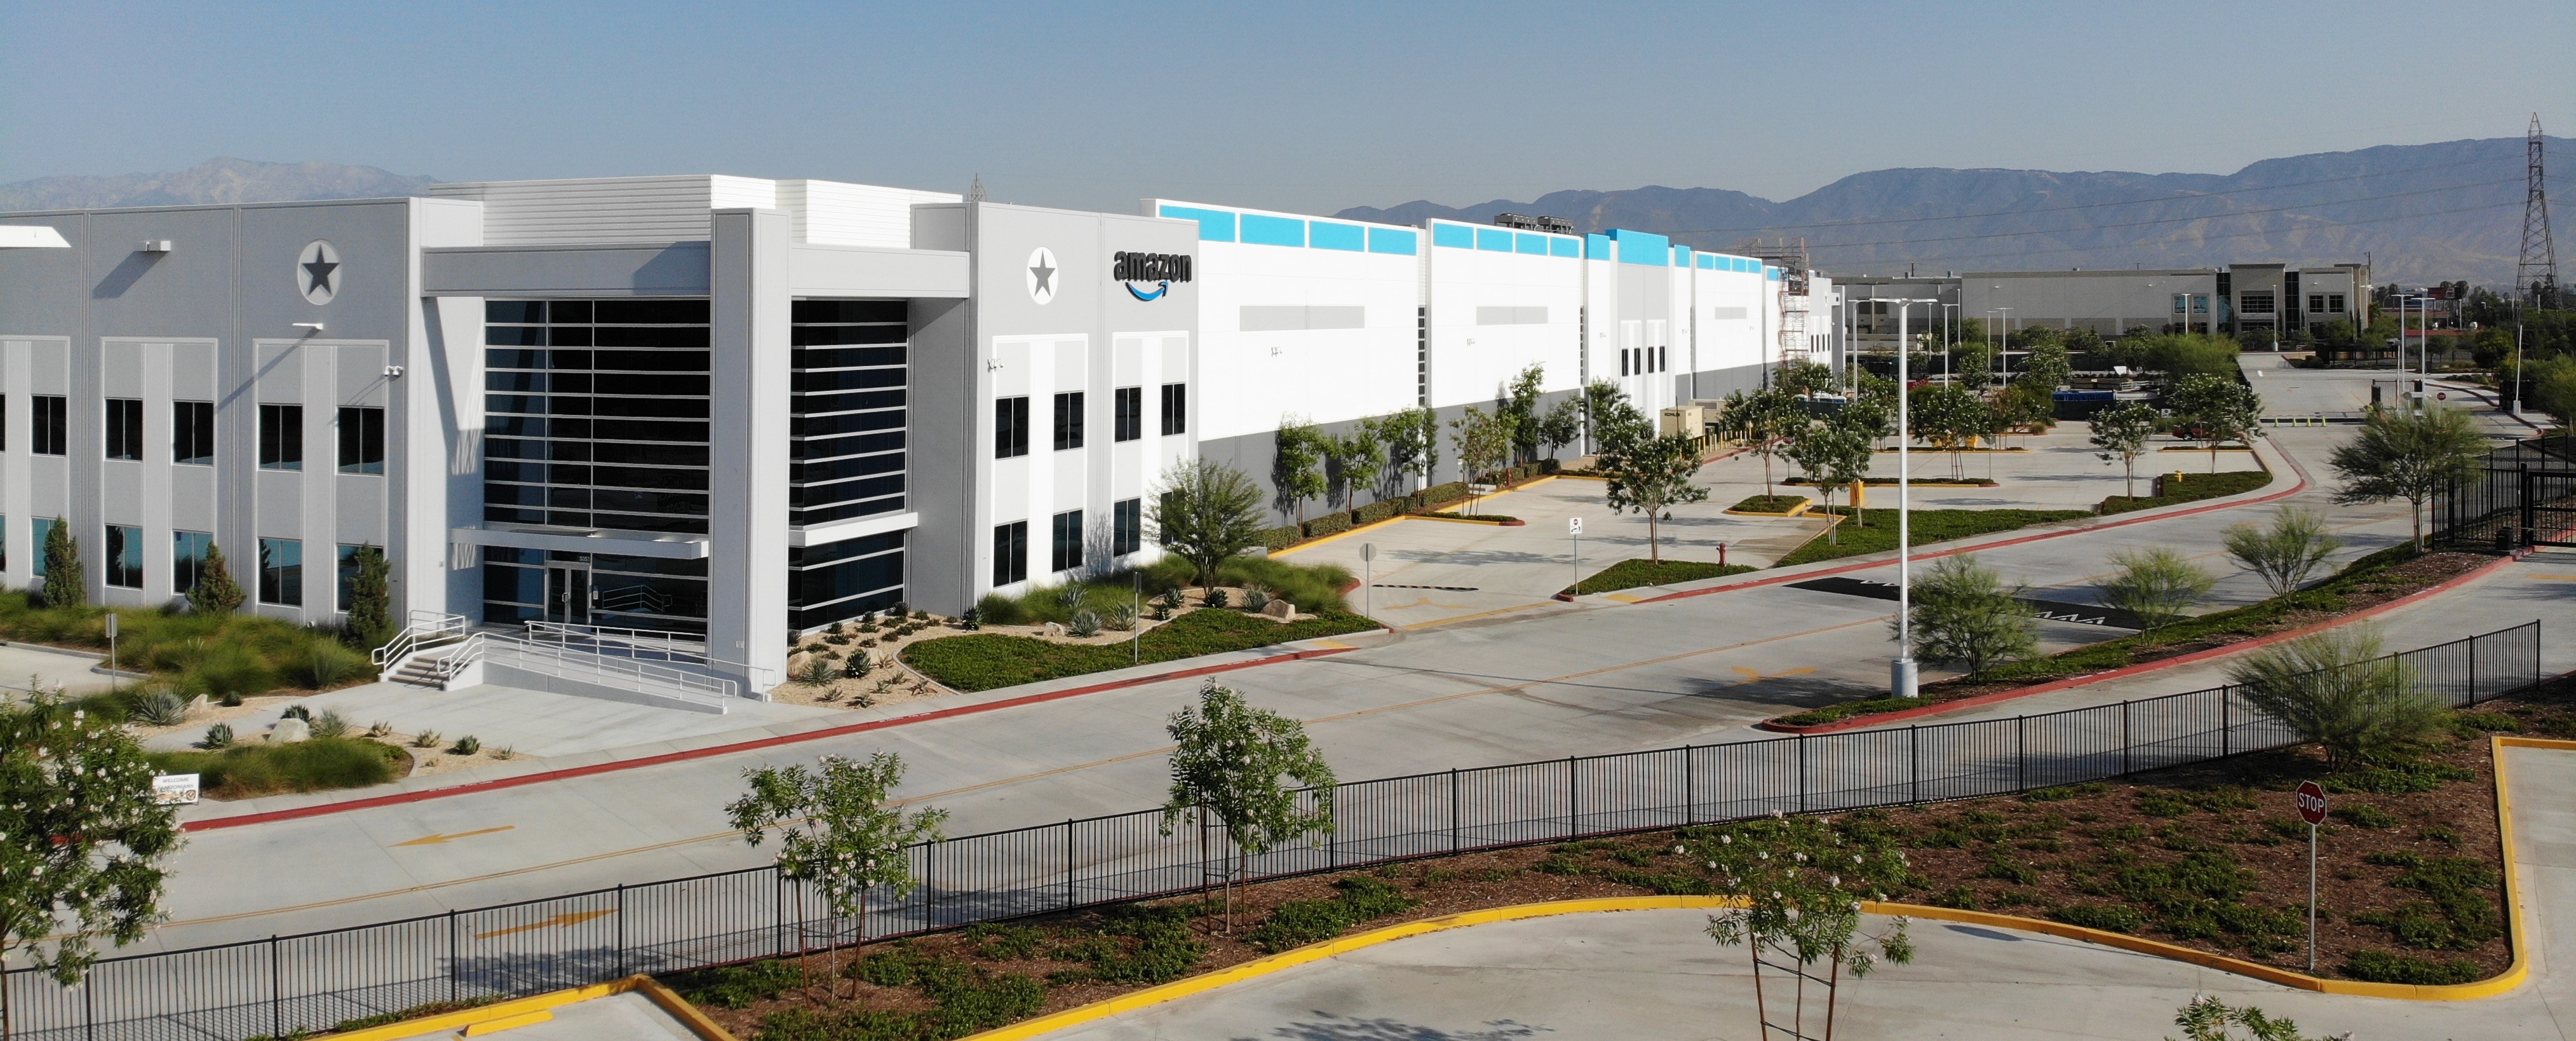 CMB Infrastructure Investment Group 78, LP (“Group 78”) was an EB-5 investment opportunity which provided an EB-5 loan of $75.5 million to a Hillwood Development Company affiliate to finance various phases of the development and construction of two industrial logistics subprojects known as Waterman TI and Veterans Industrial Park I-215.